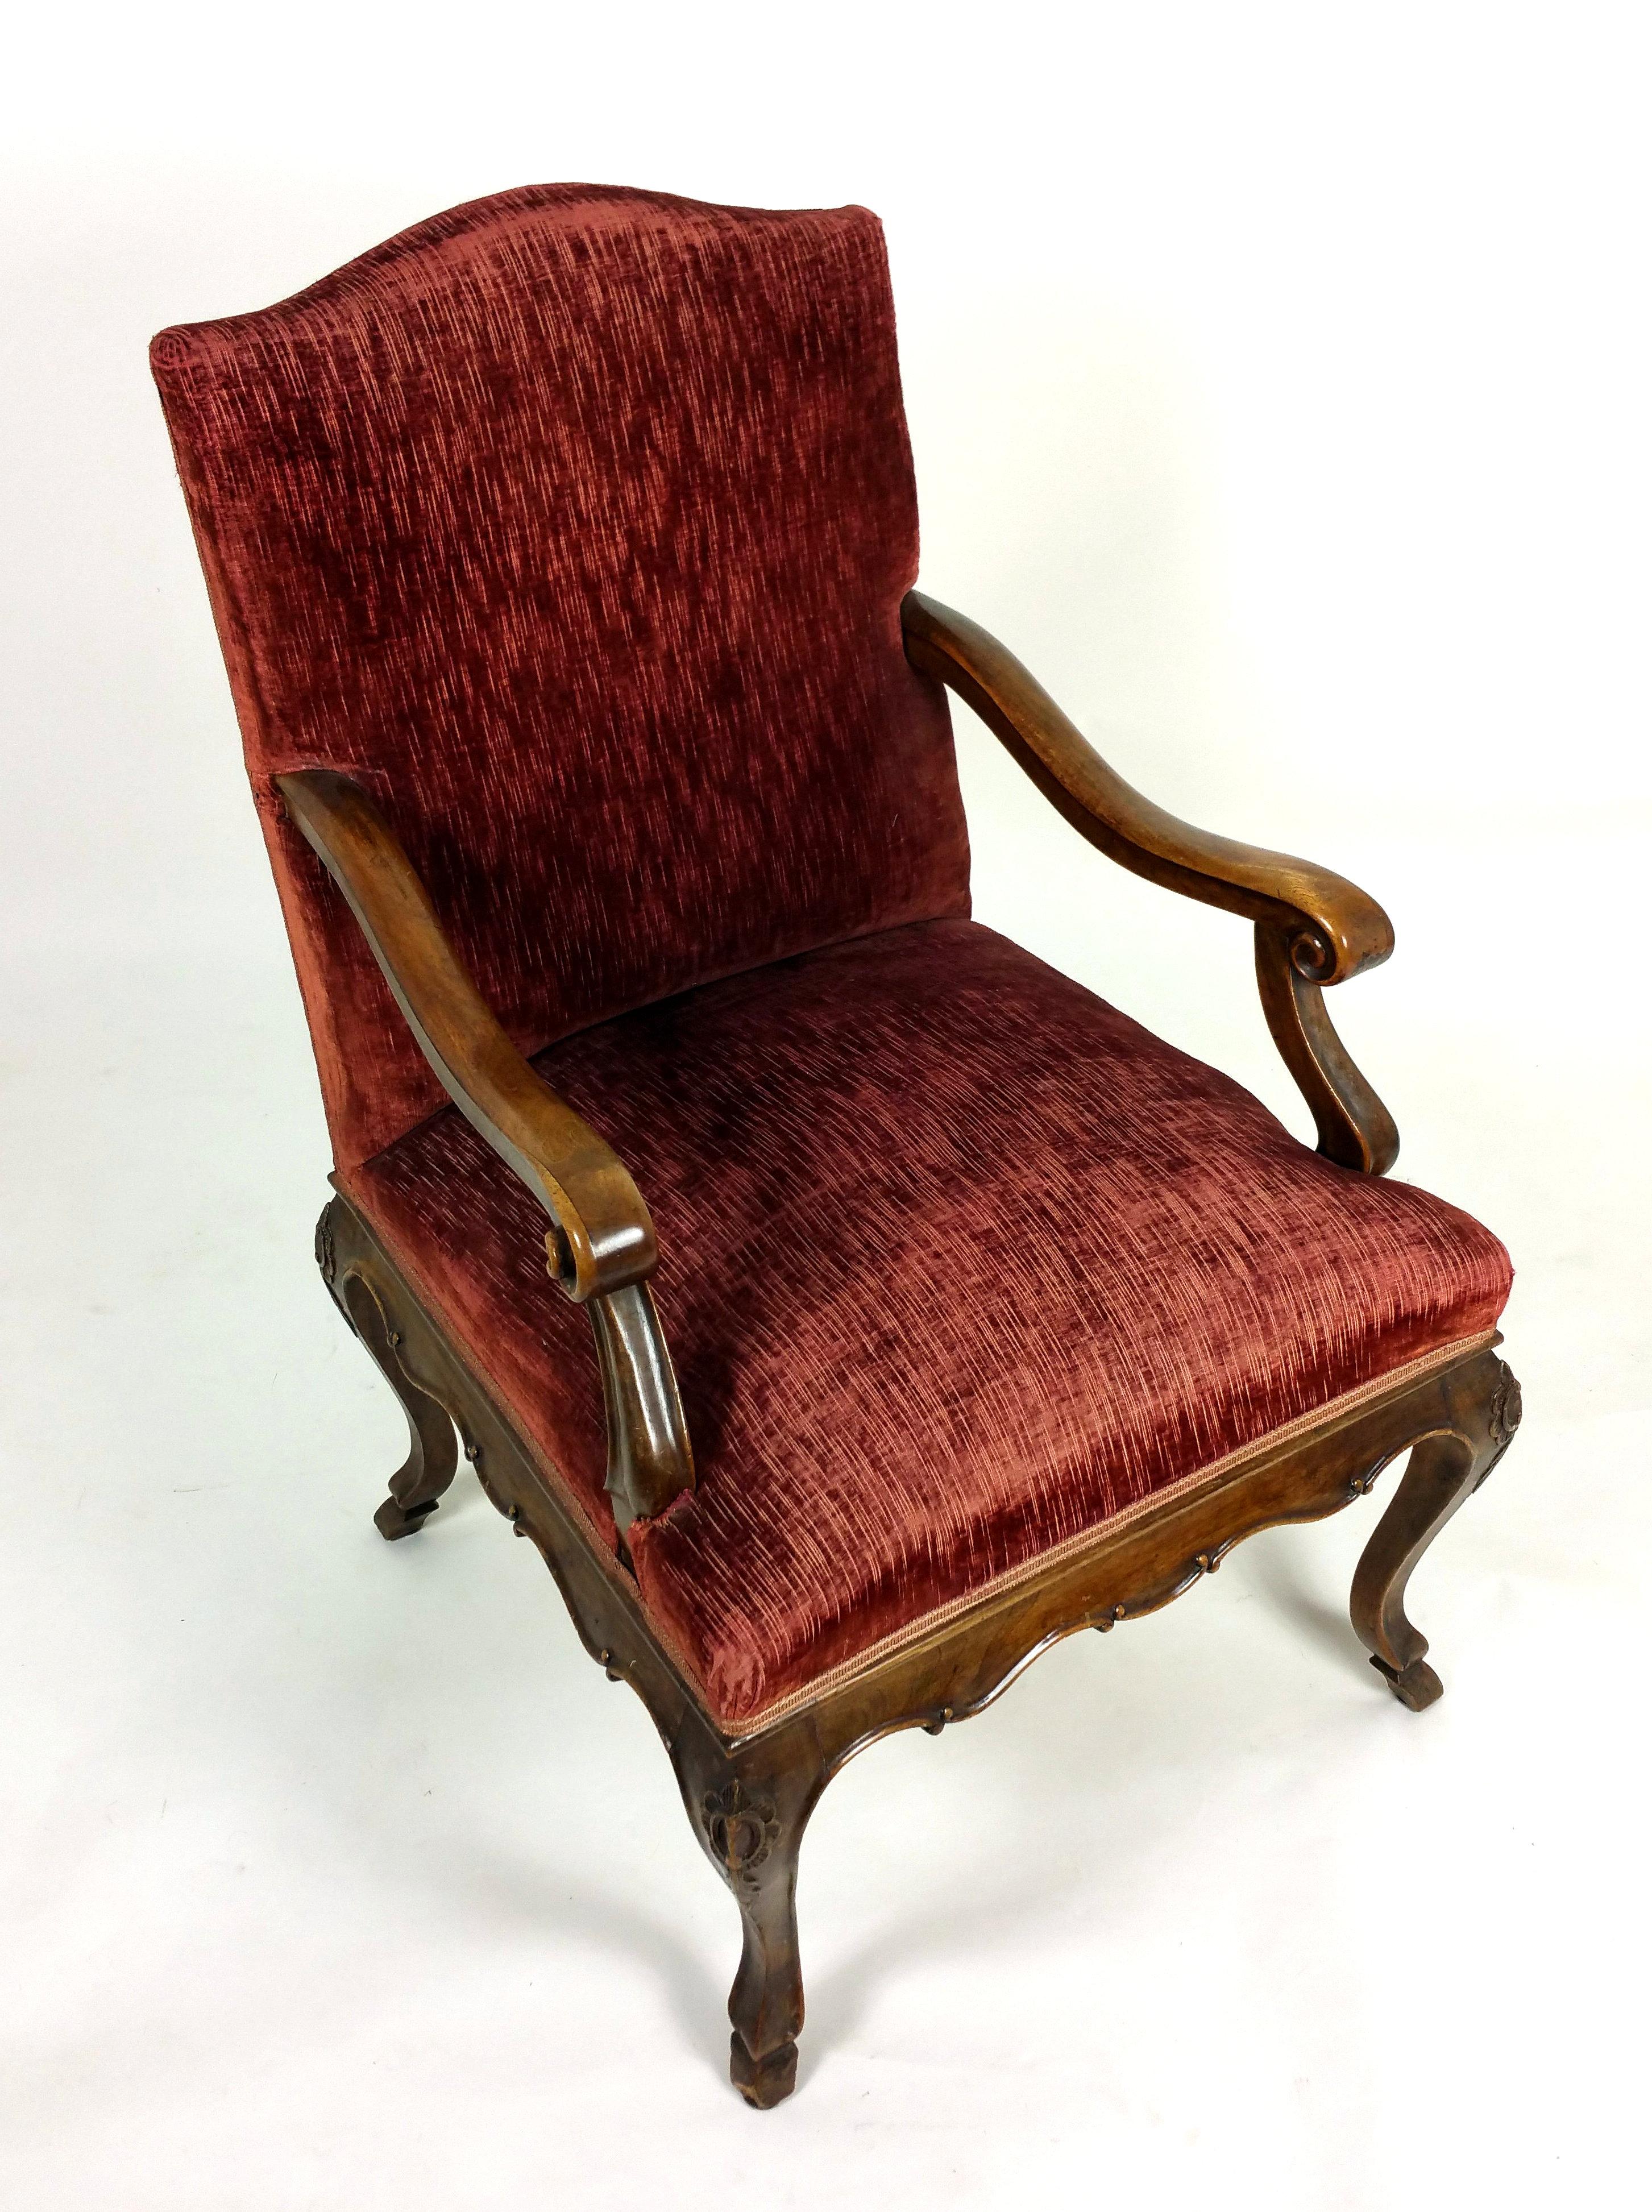 Pair of Large 19th Century French Solid Walnut Upholstered Chairs In Good Condition For Sale In London, west Sussex